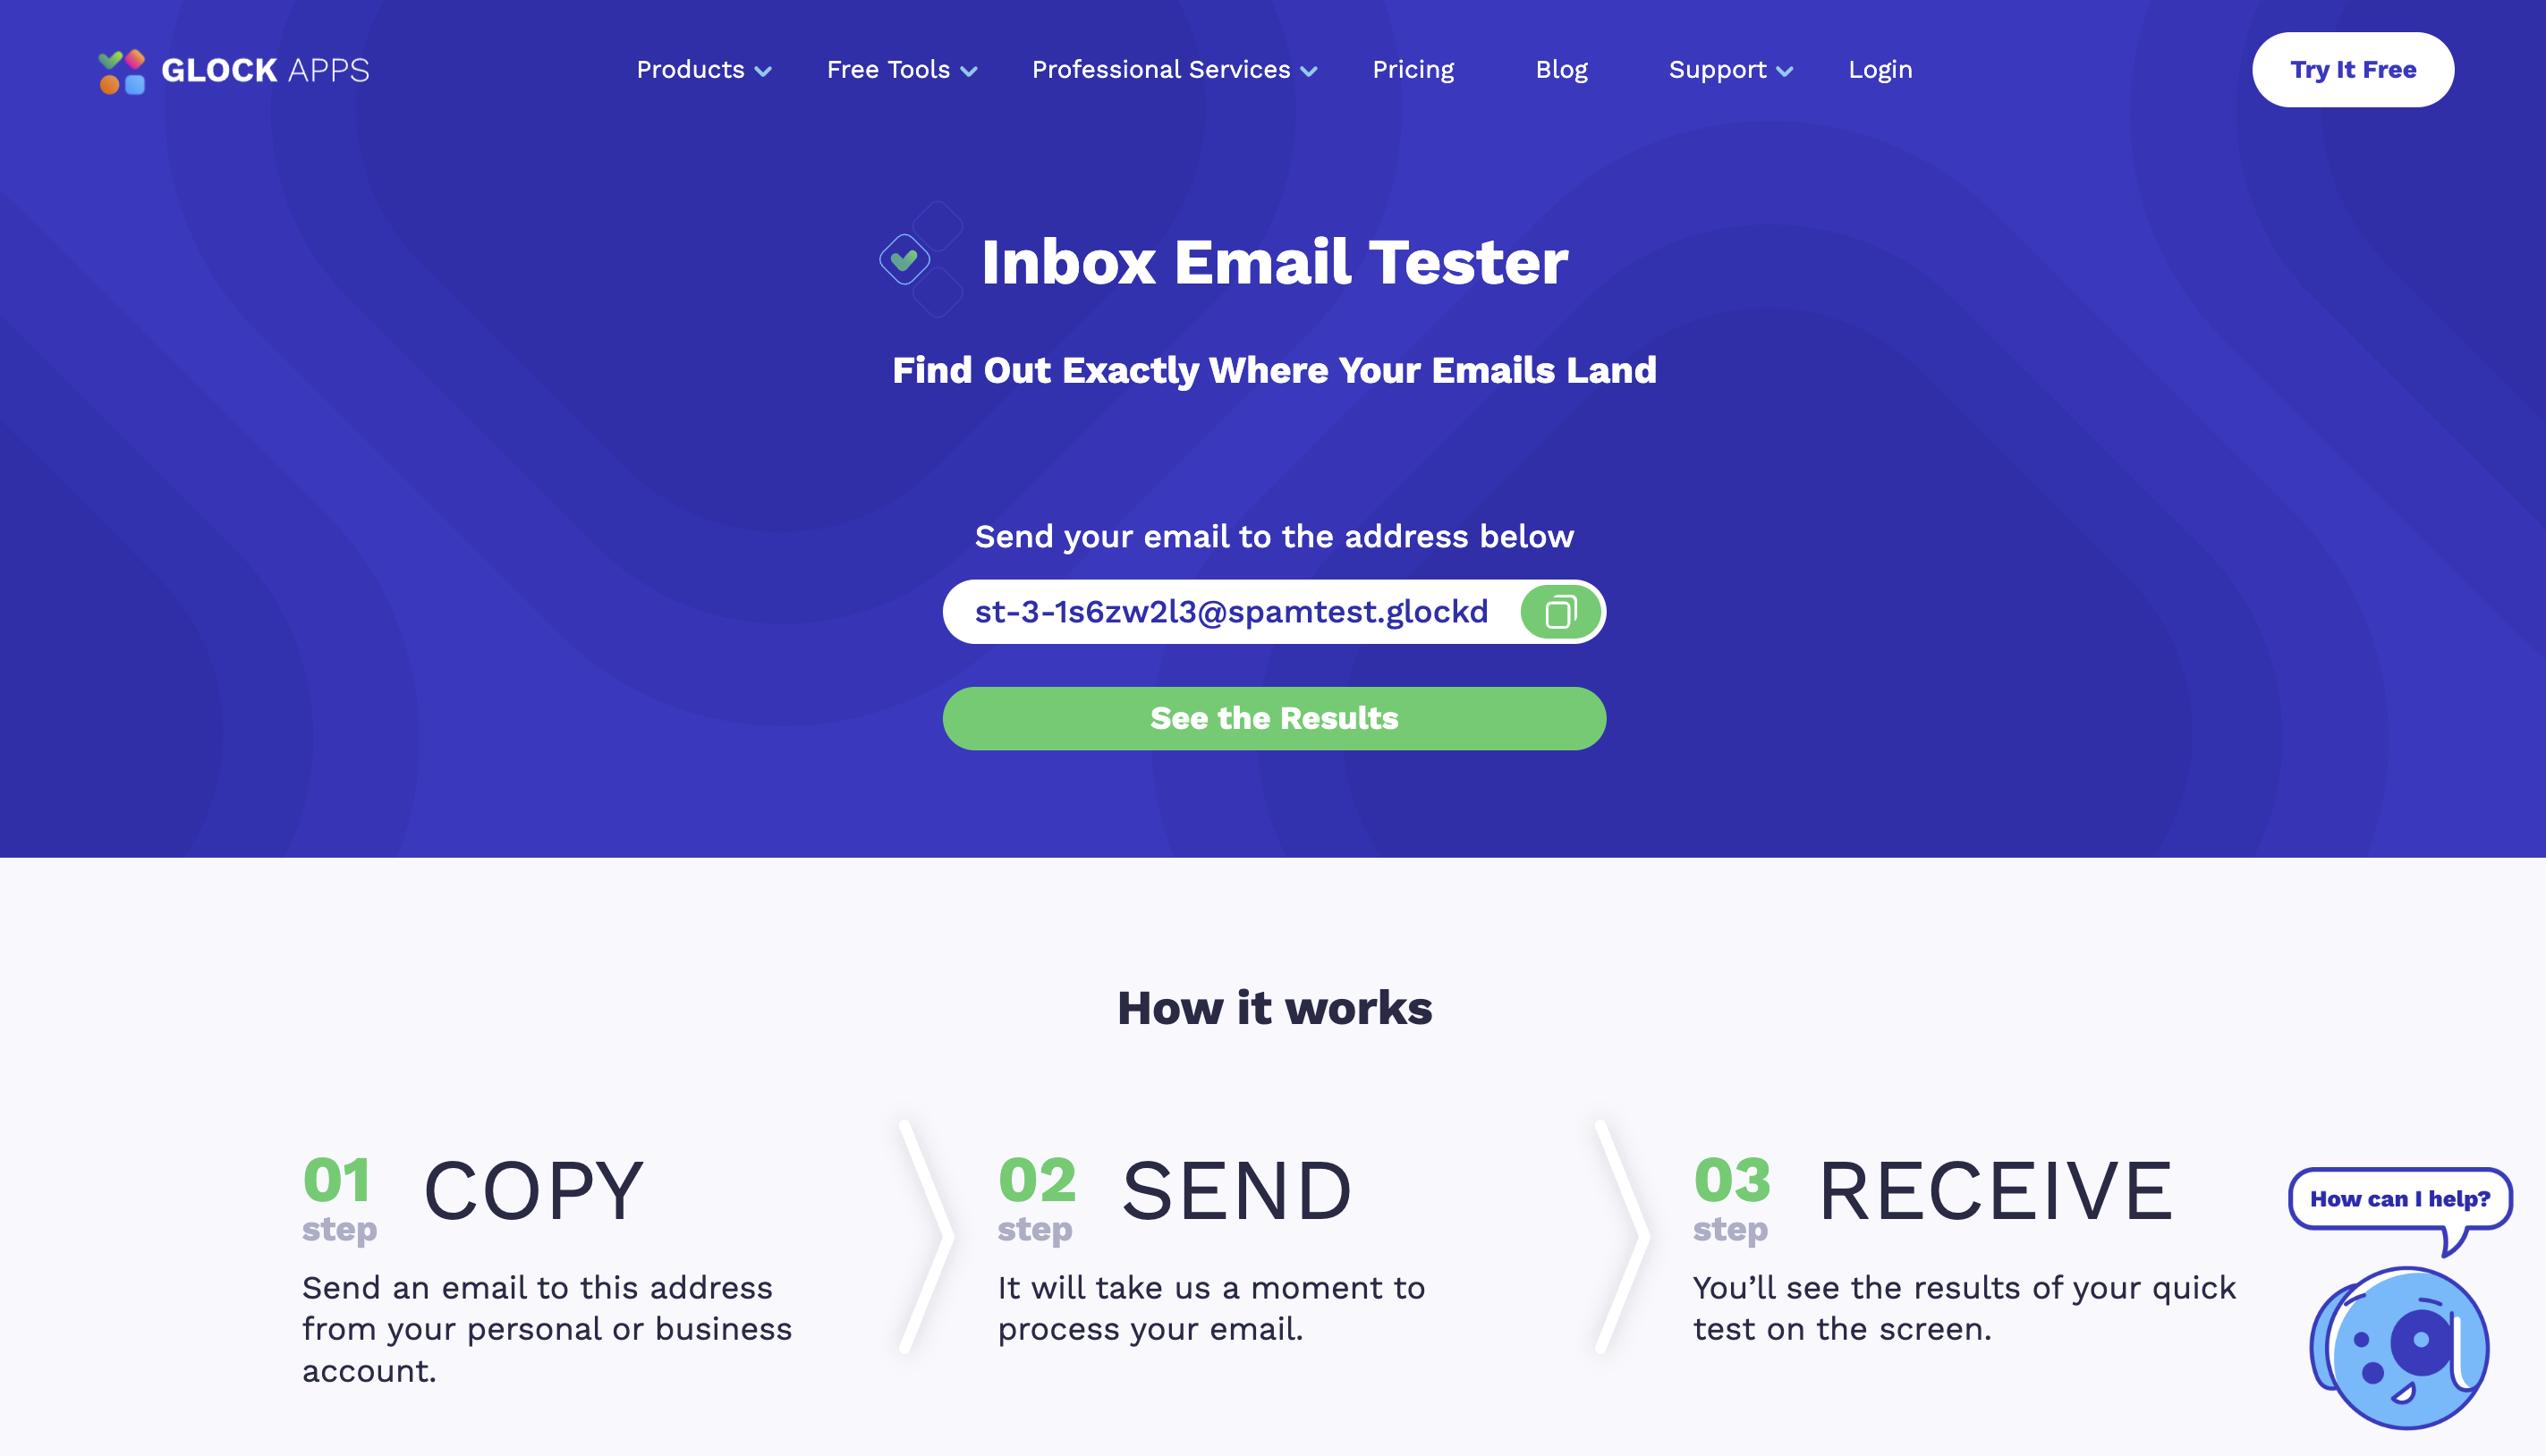 Email inbox tester by Glockapps